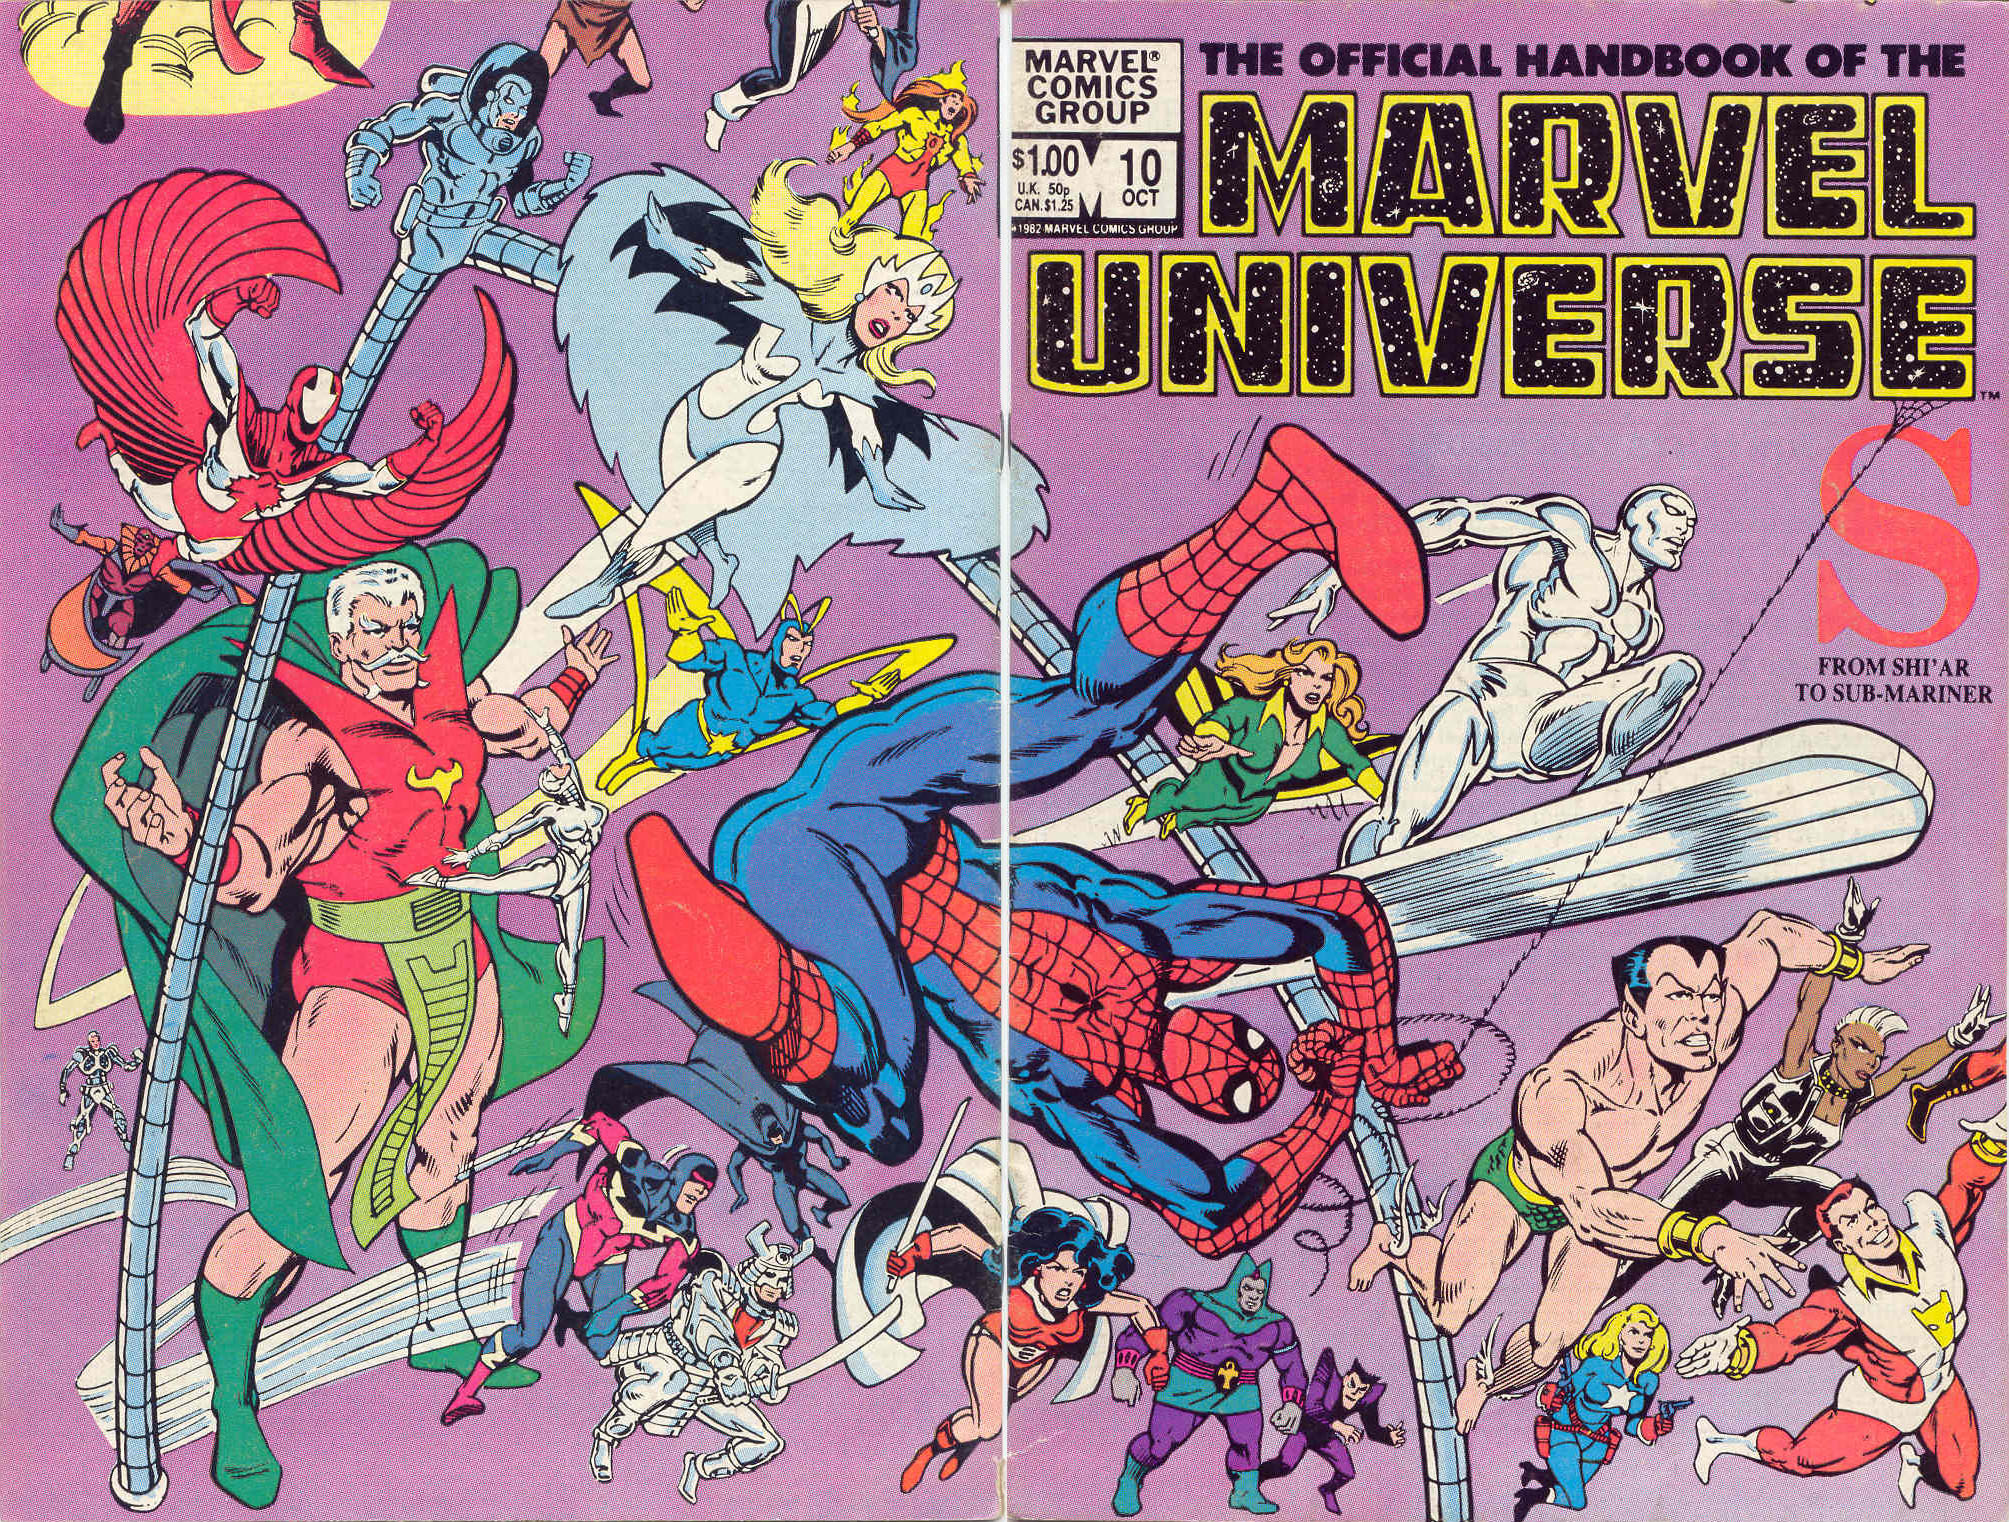 Read online The Official Handbook of the Marvel Universe comic -  Issue #10 - 1